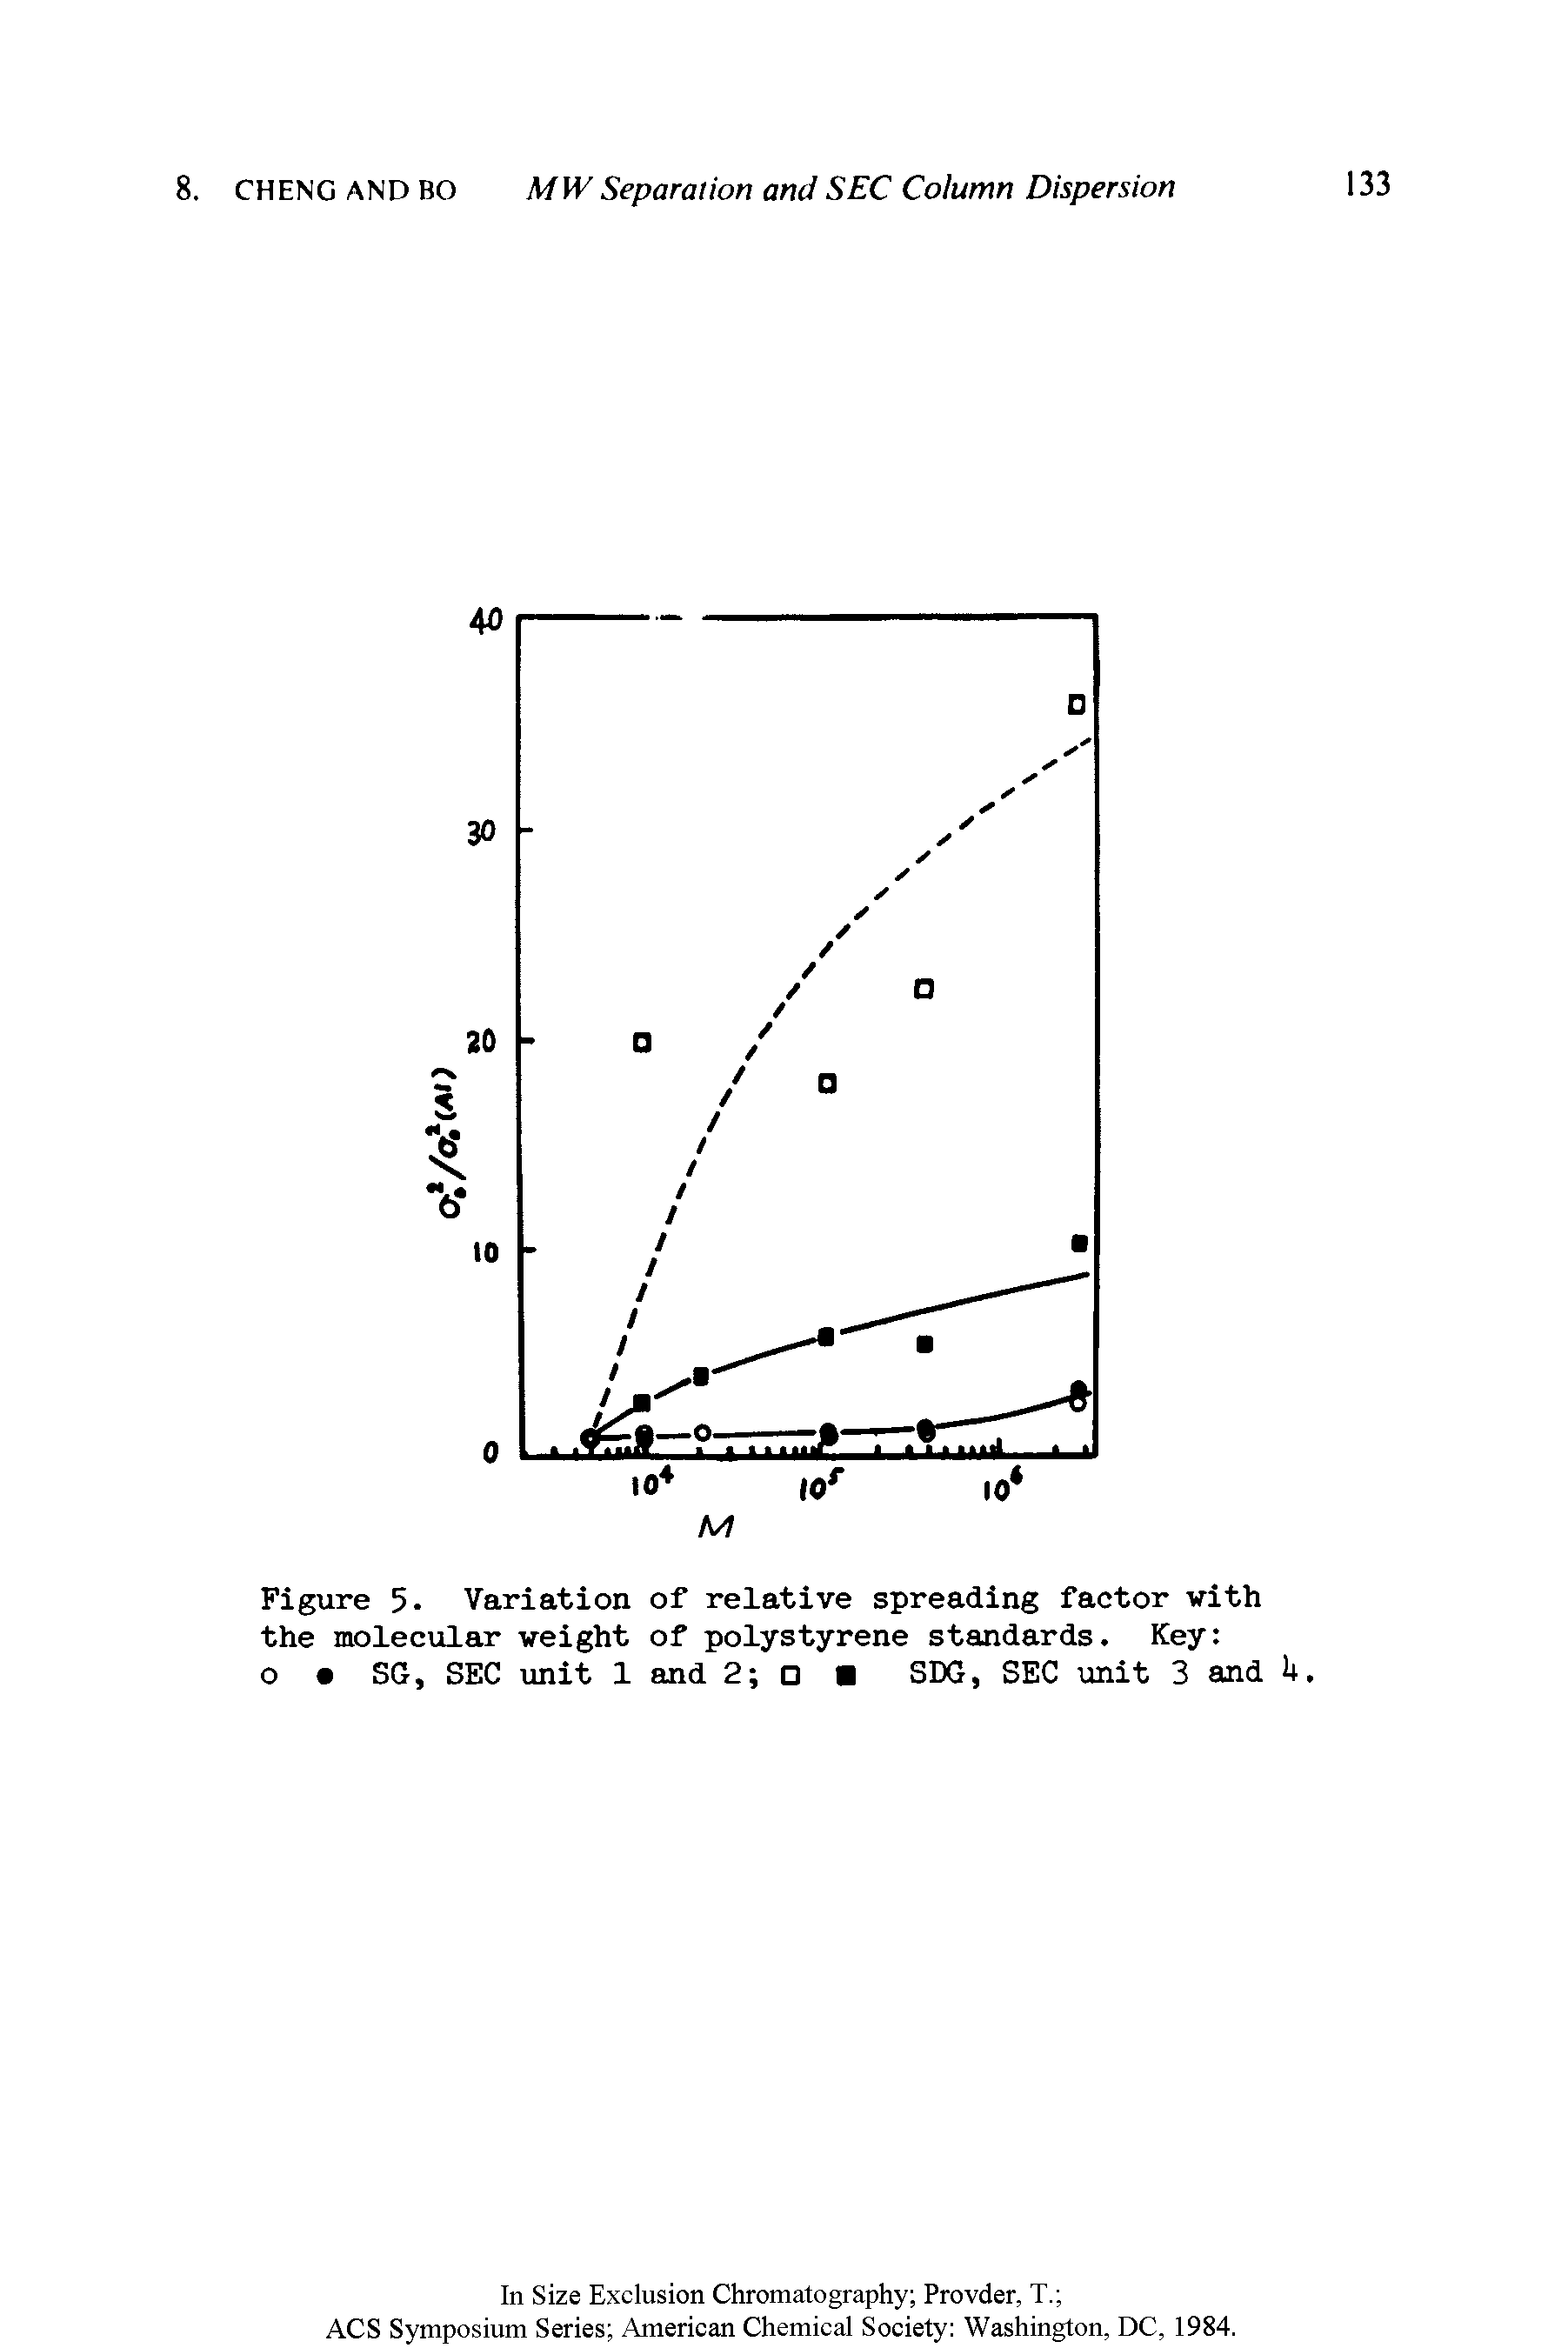 Figure 5. Variation of relative spreading factor with the molecular weight of polystyrene standards. Key o SG, SEC unit 1 and 2 SDG, SEC unit 3 and U.